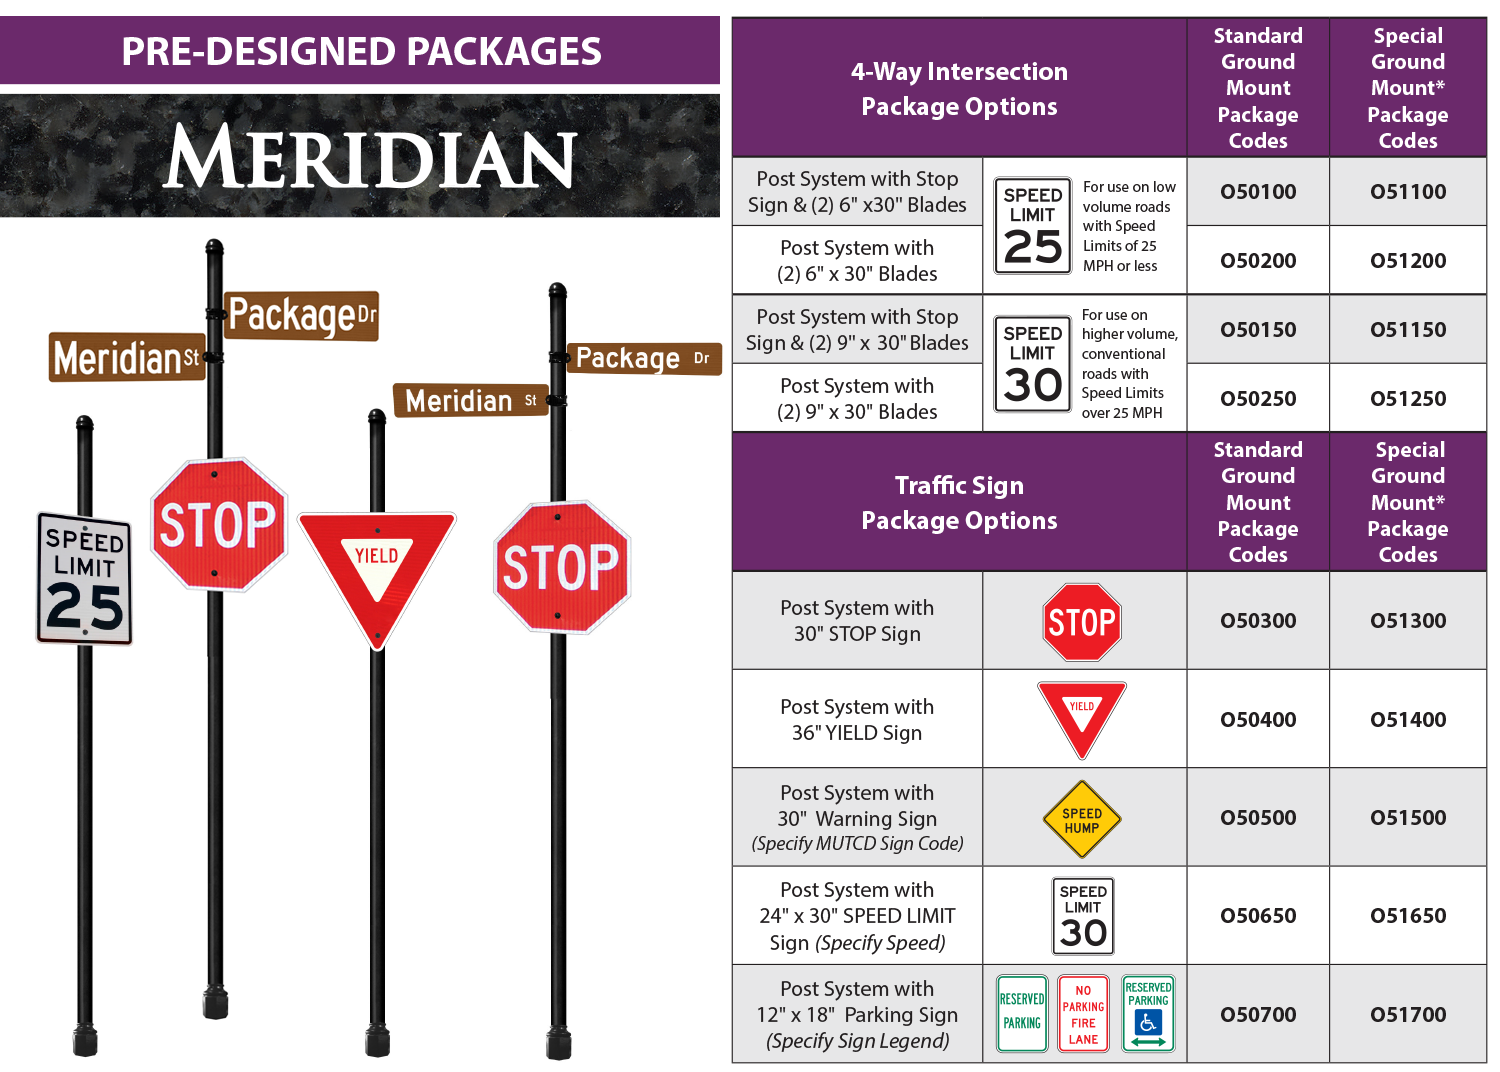 Meridian Packages Overview